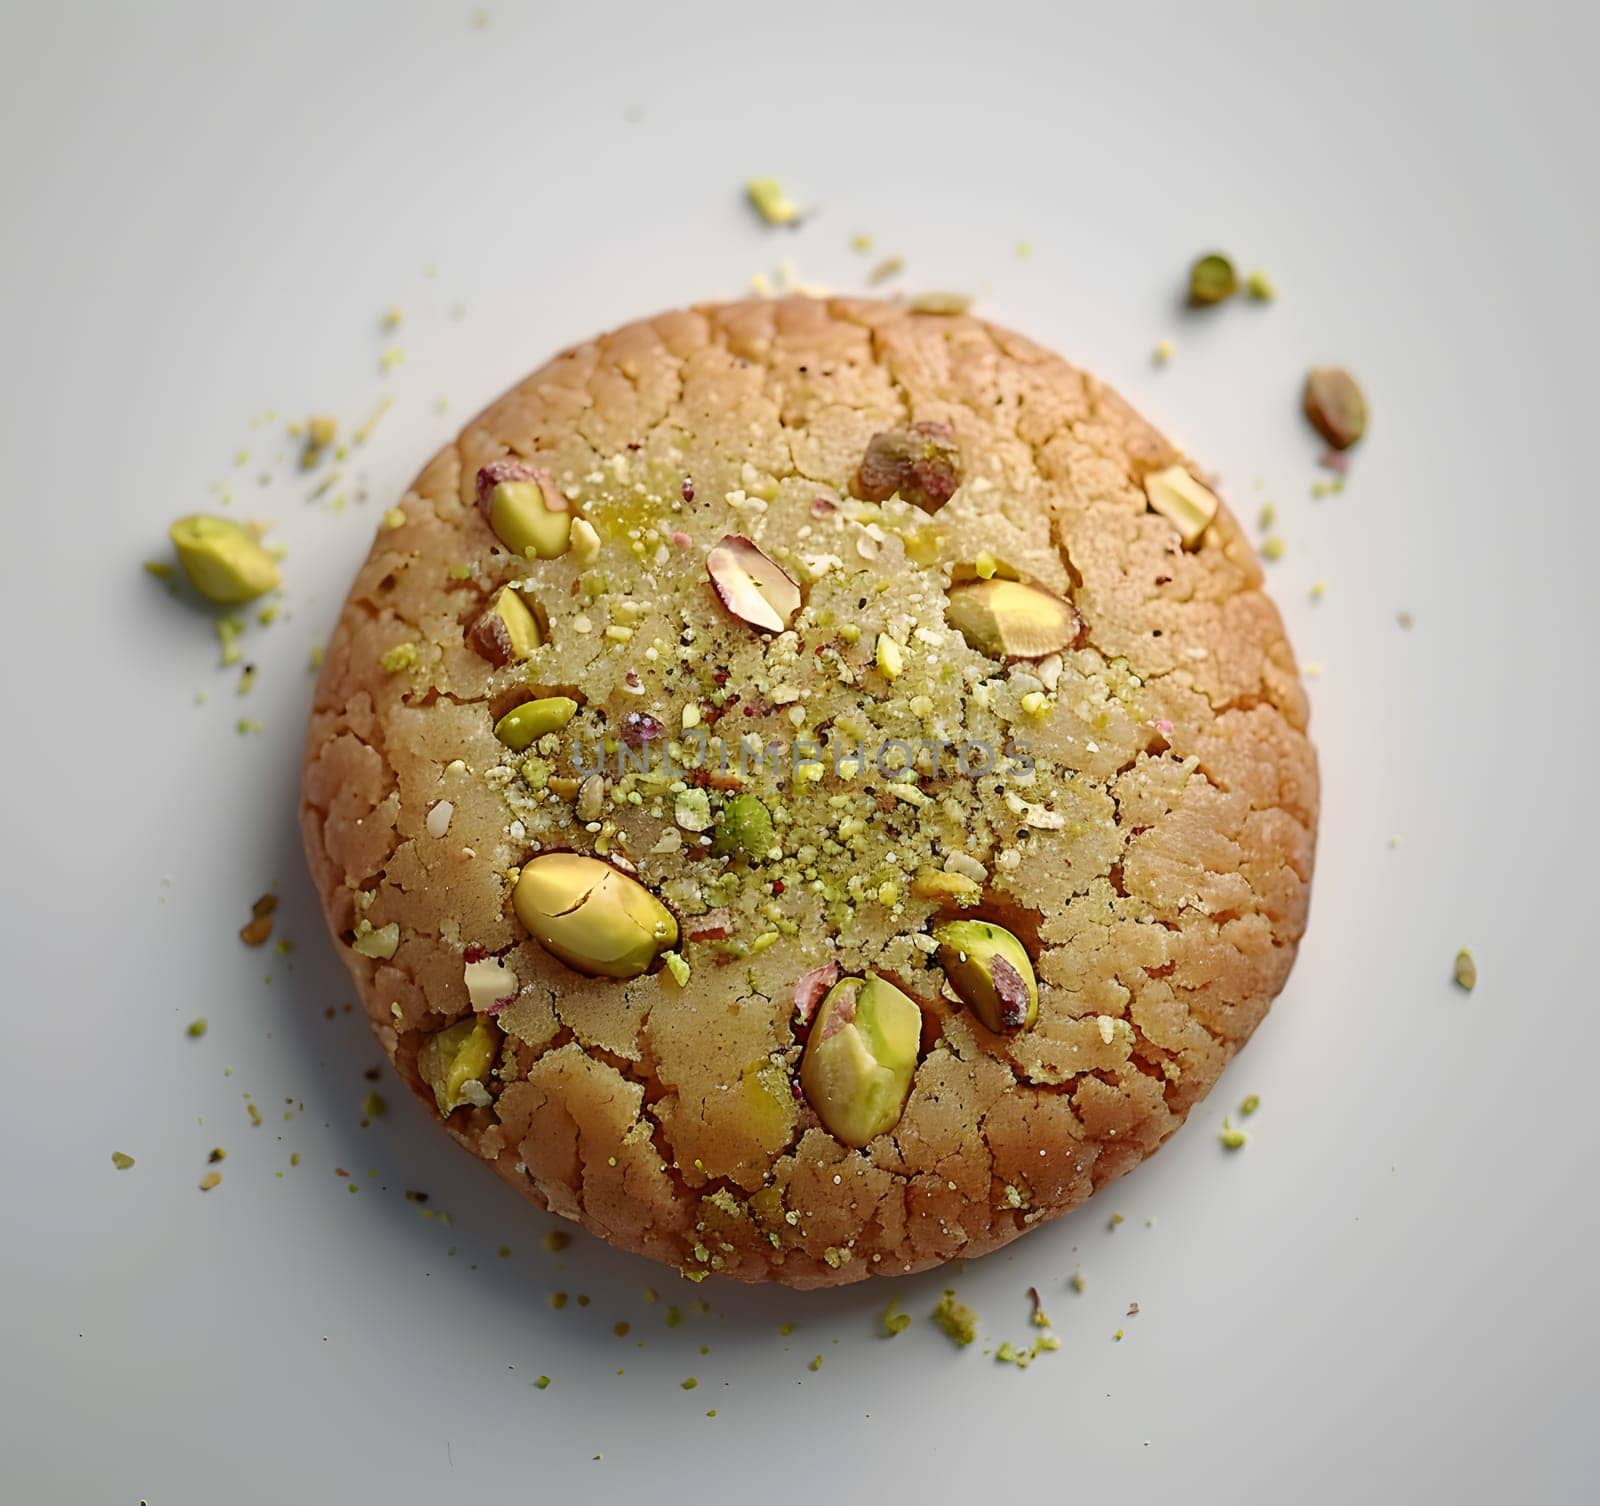 A pistachiotopped cookie on a white surface, a delicious baked goods option by Nadtochiy